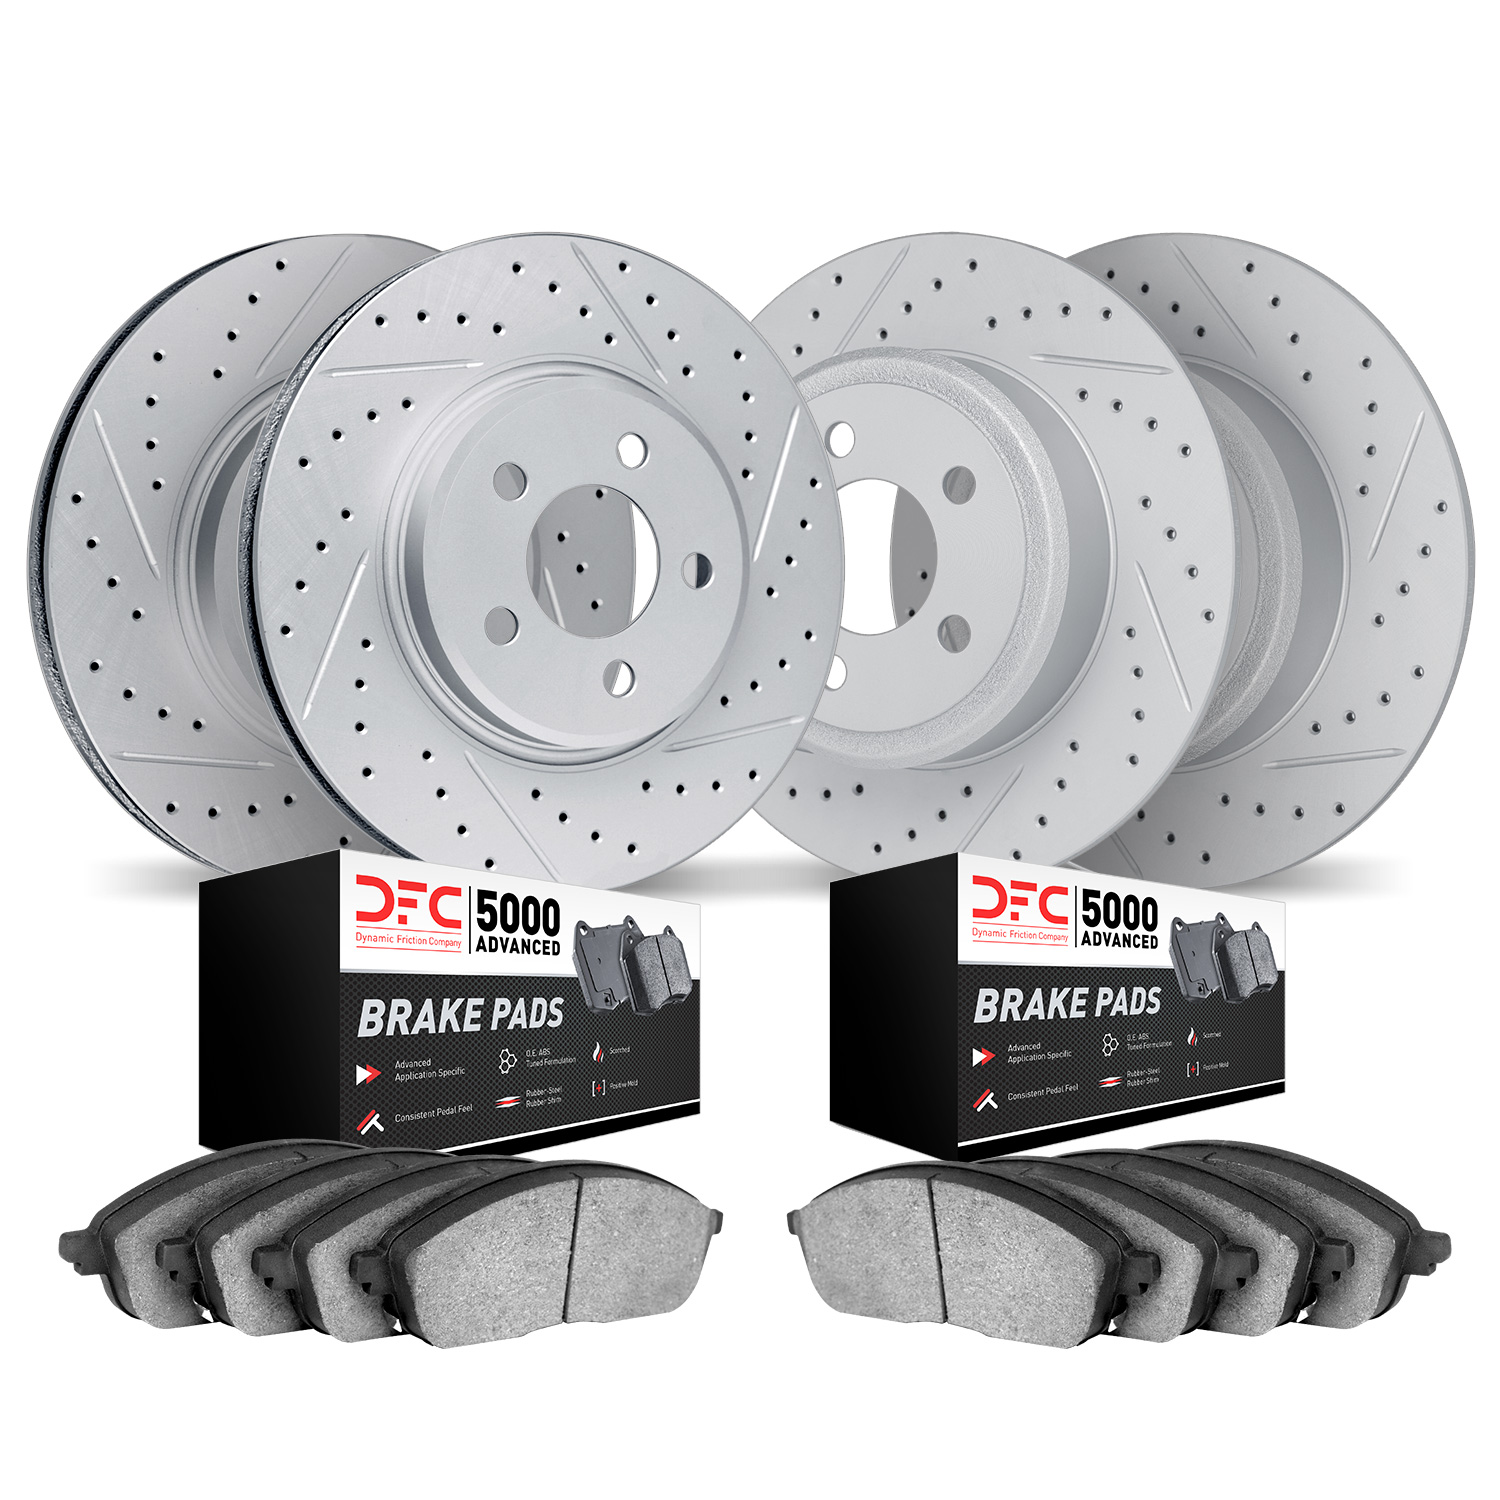 2504-76106 Geoperformance Drilled/Slotted Rotors w/5000 Advanced Brake Pads Kit, 2004-2009 Lexus/Toyota/Scion, Position: Front a